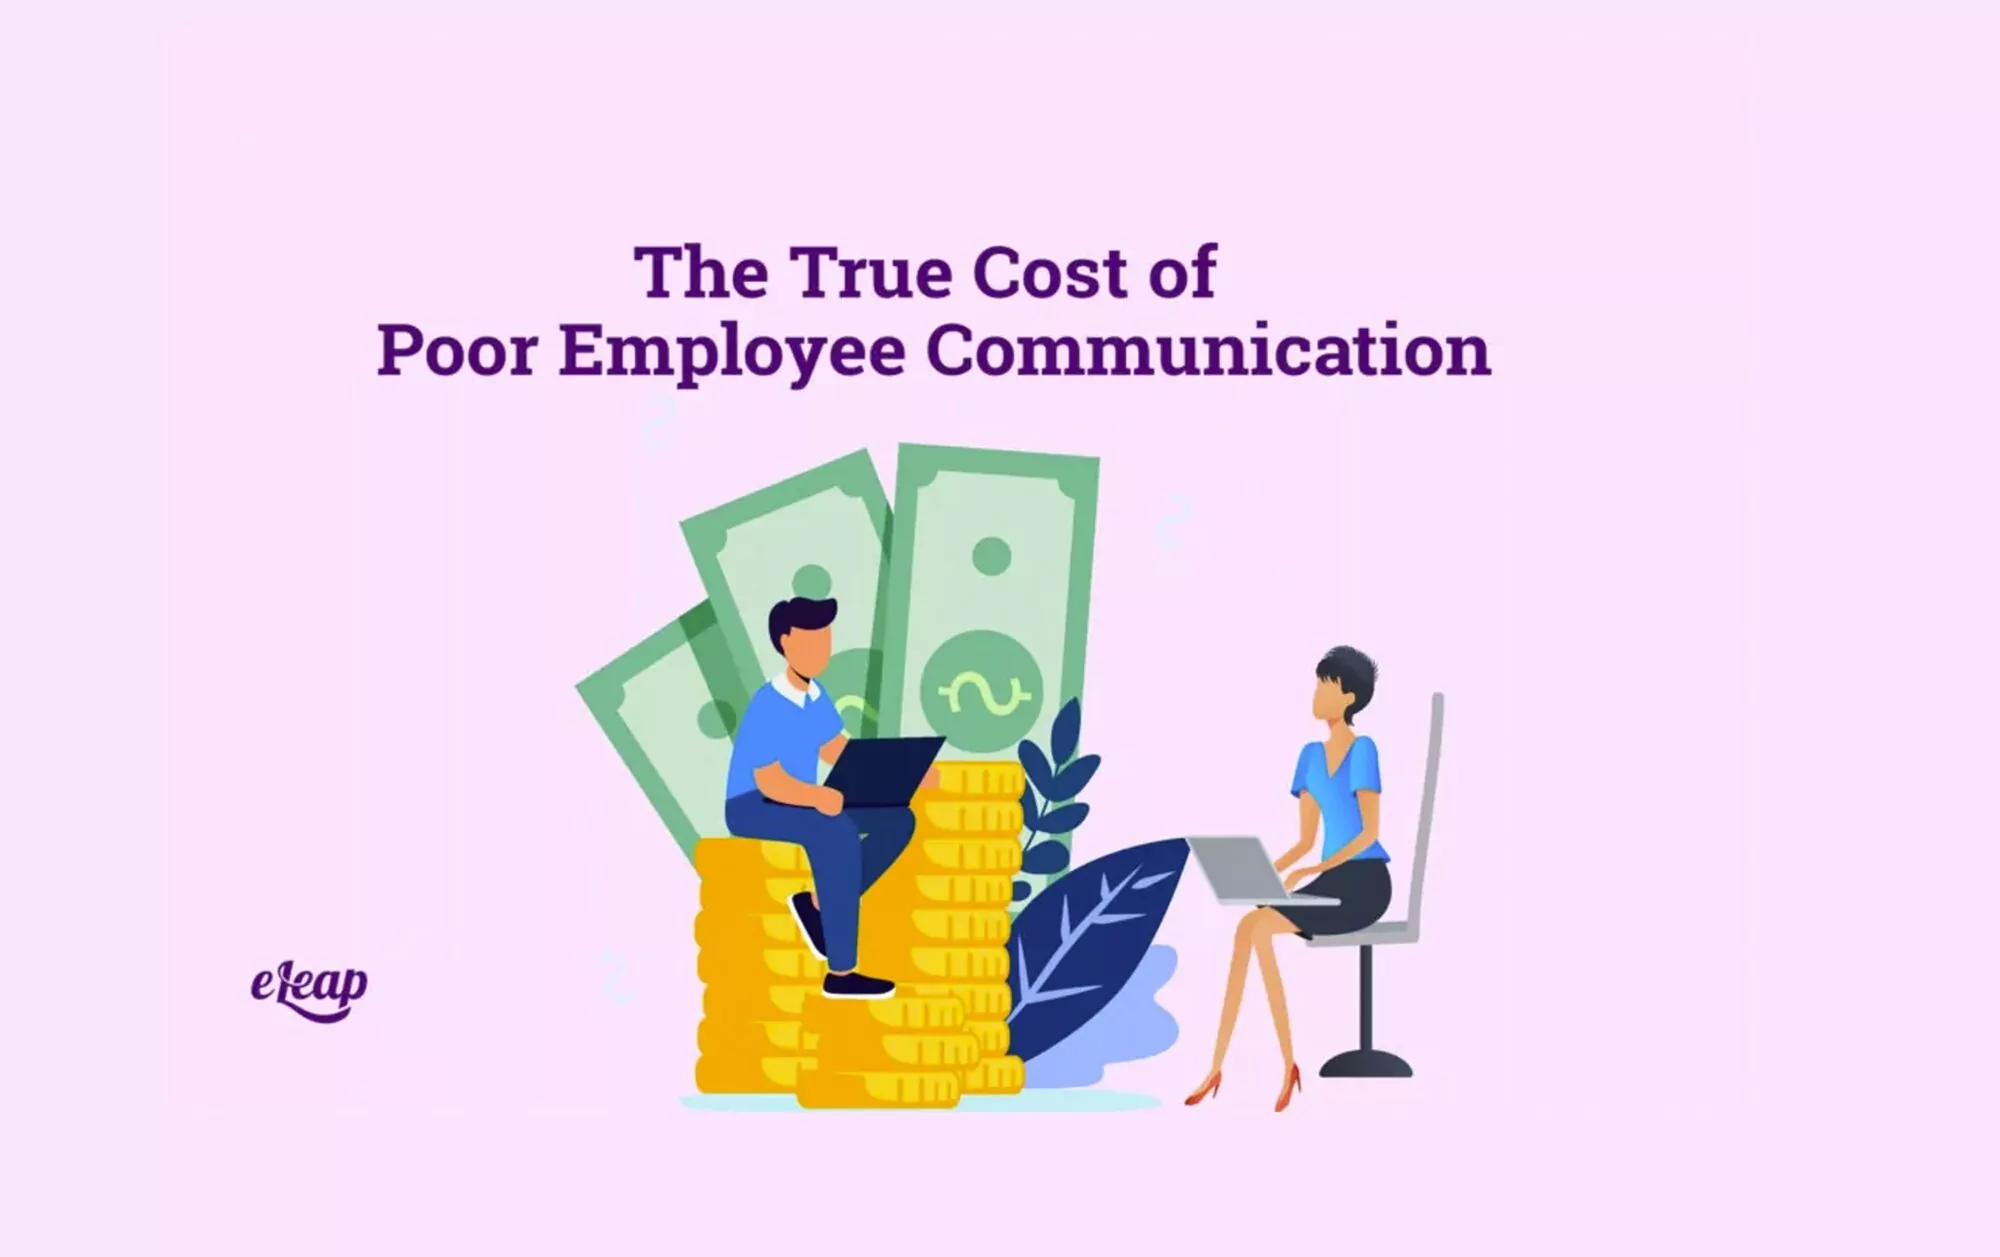 The True Cost of Poor Employee Communication